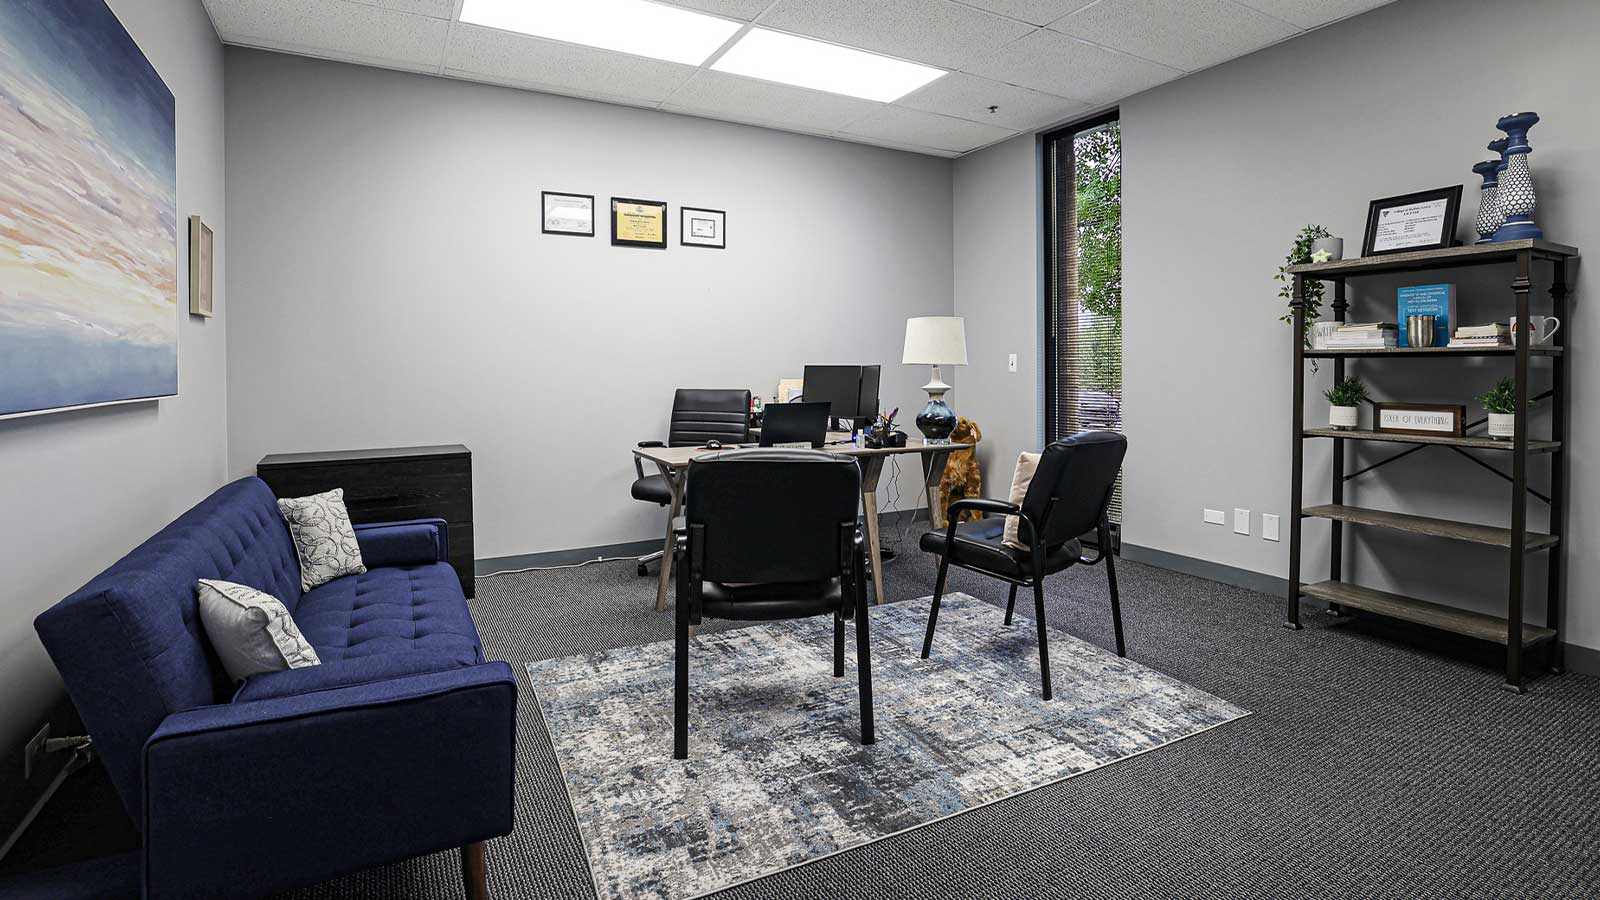 An office space with a blue sofa, desk, chairs, bookshelf, and framed certificates on the wall.